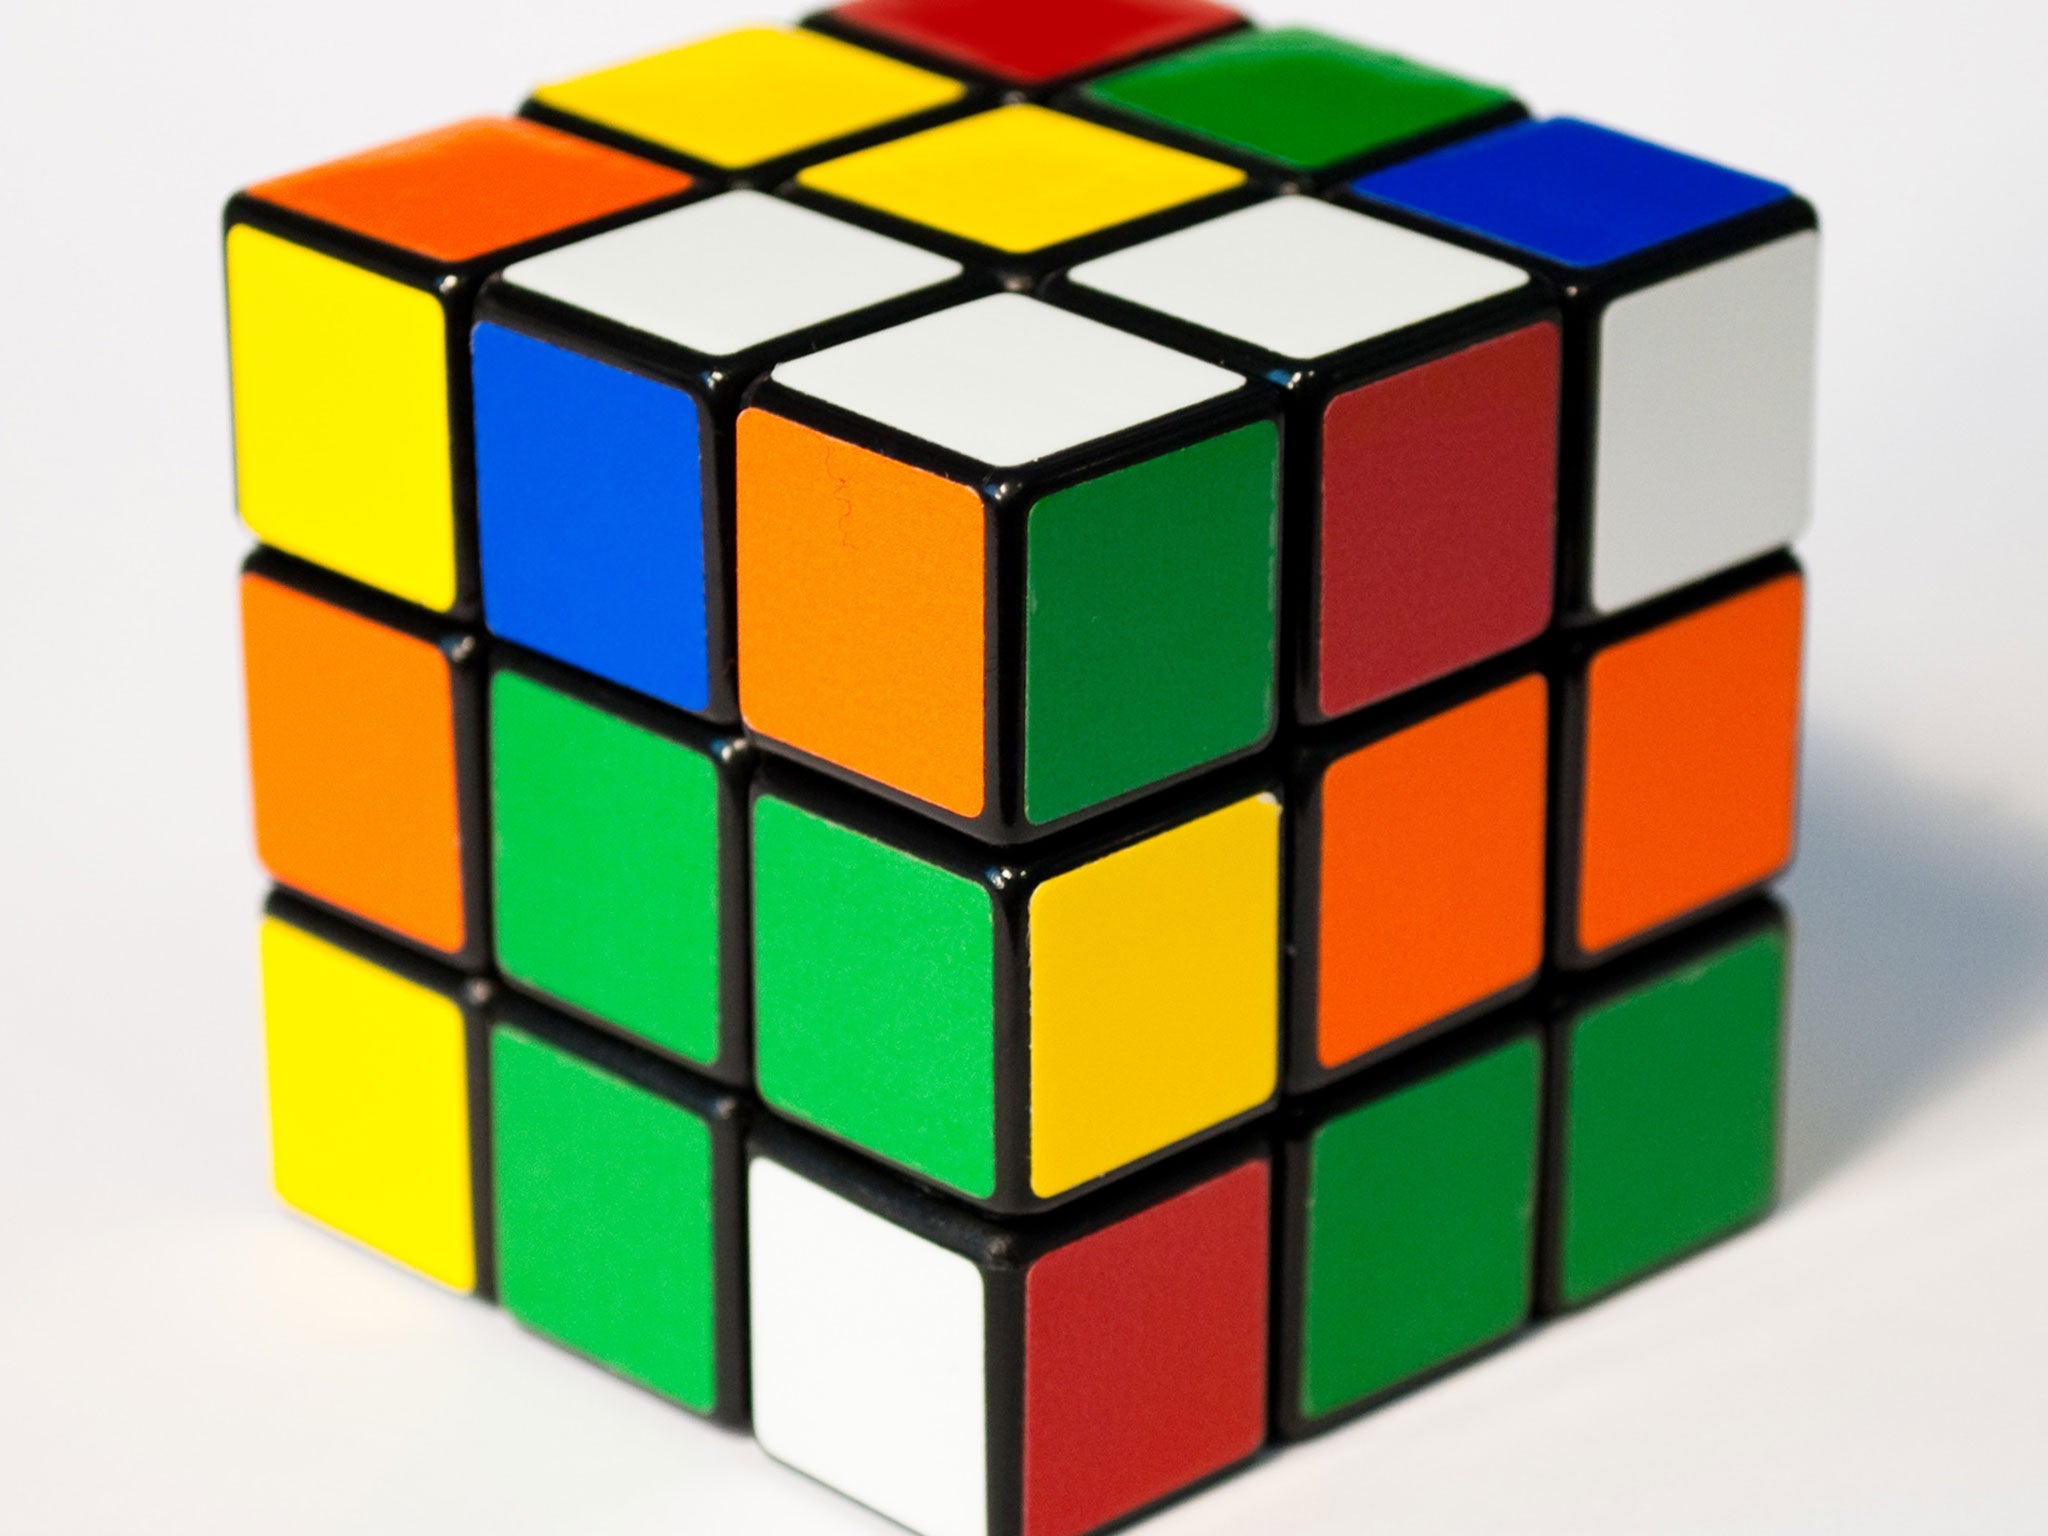 Rubik's Cube shape is not a trademark, EU rules, The Independent